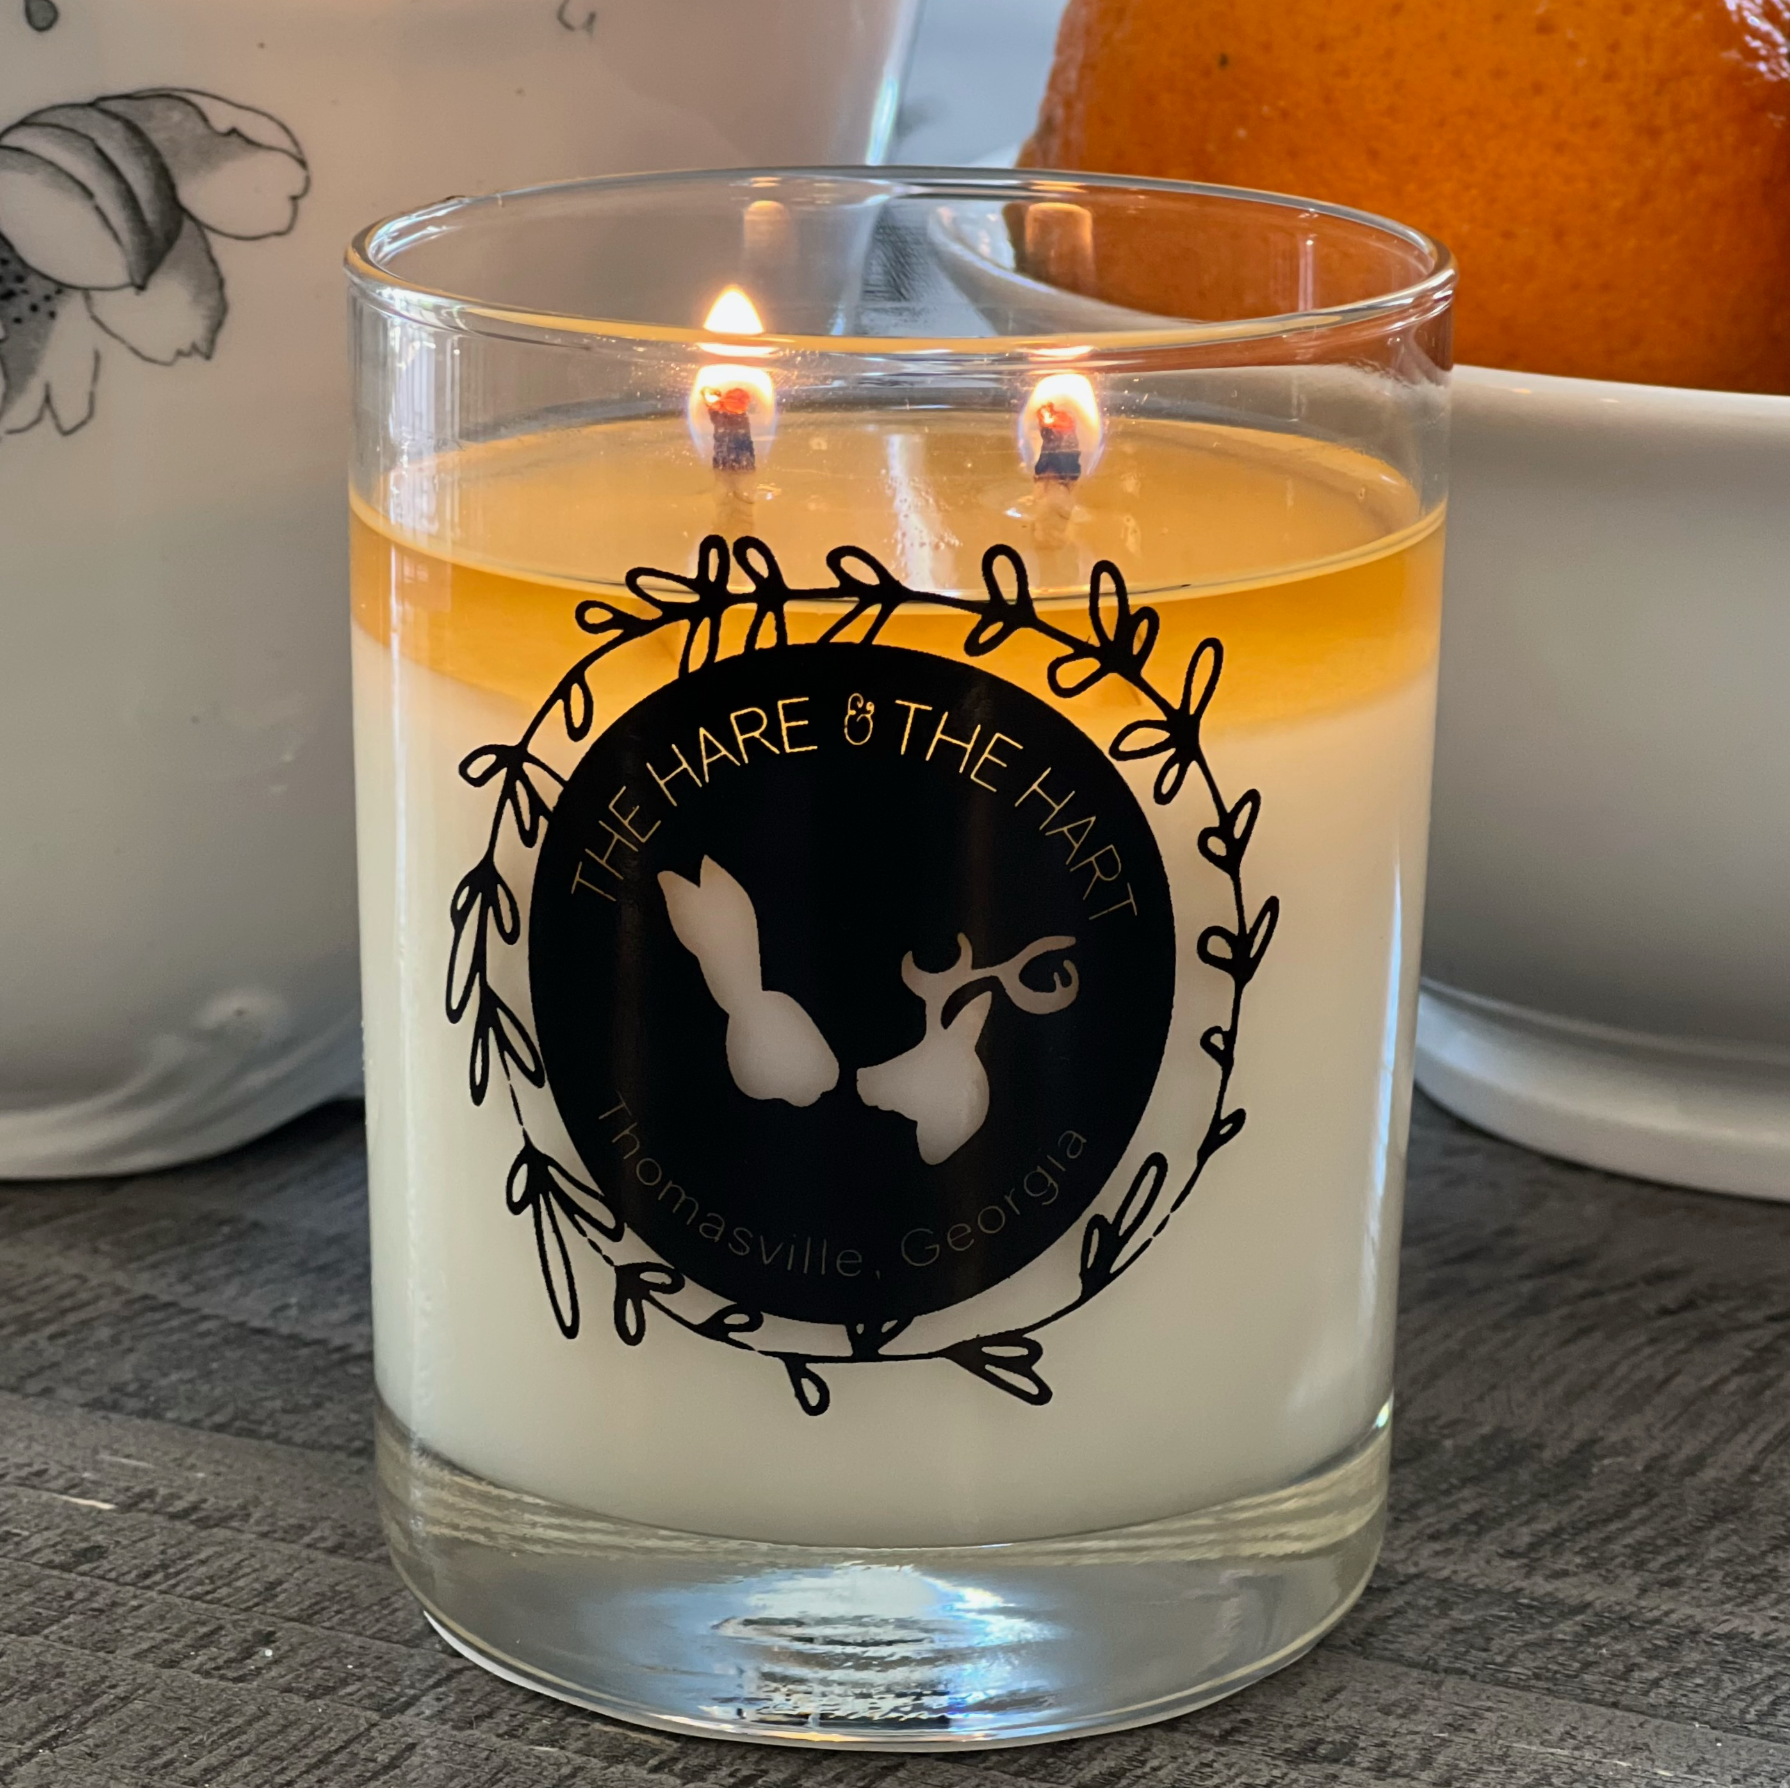 The Hare & The Hart Candle - Lavender + Black Pepper